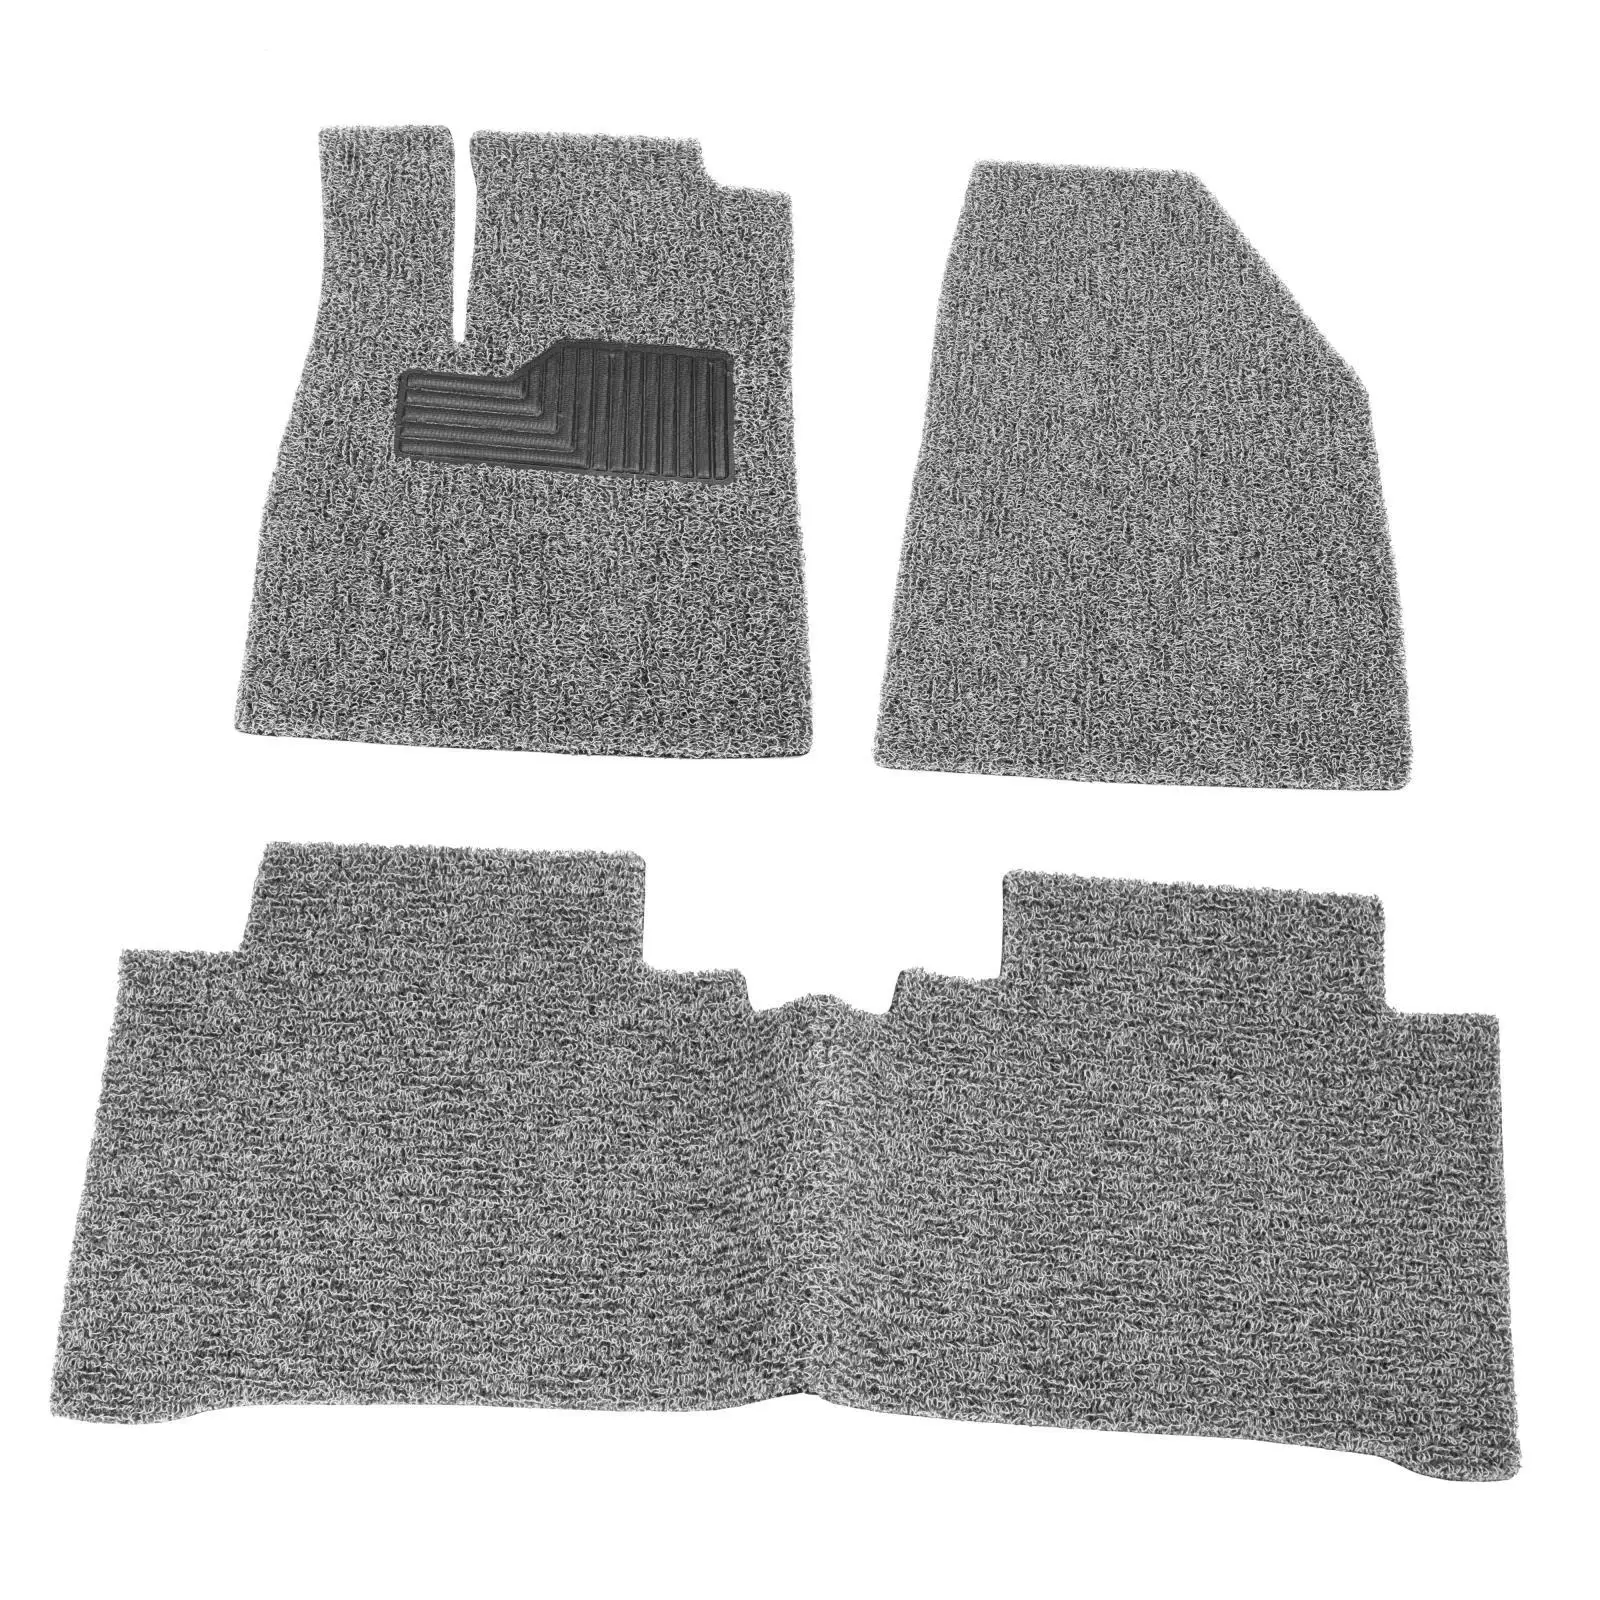 3 Pieces Automotive Floor Mats Protection High Toughness Exquisite Convenient for Byd Yuan Plus Atto 3 21-23